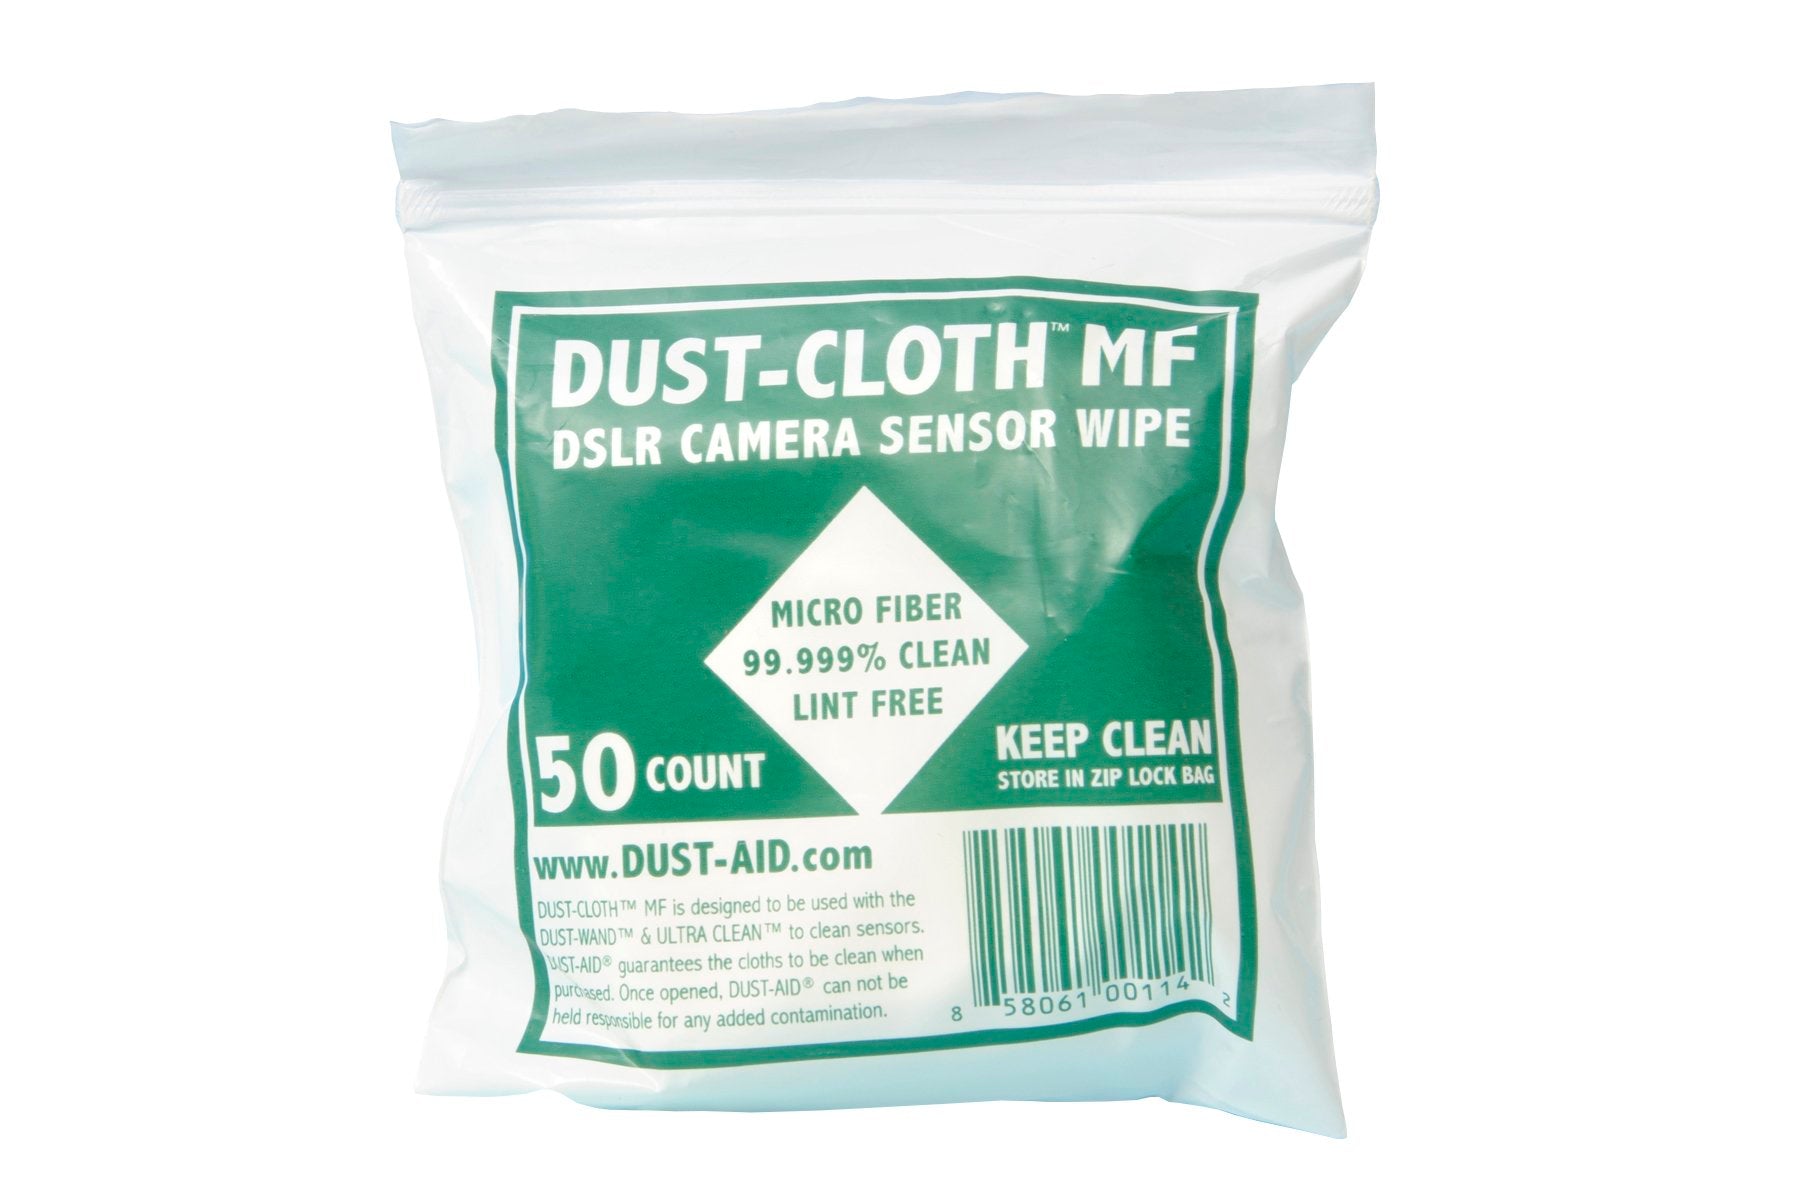 Dust-Aid DUST-CLOTH MF Cleaning Wipes (pack of 50)